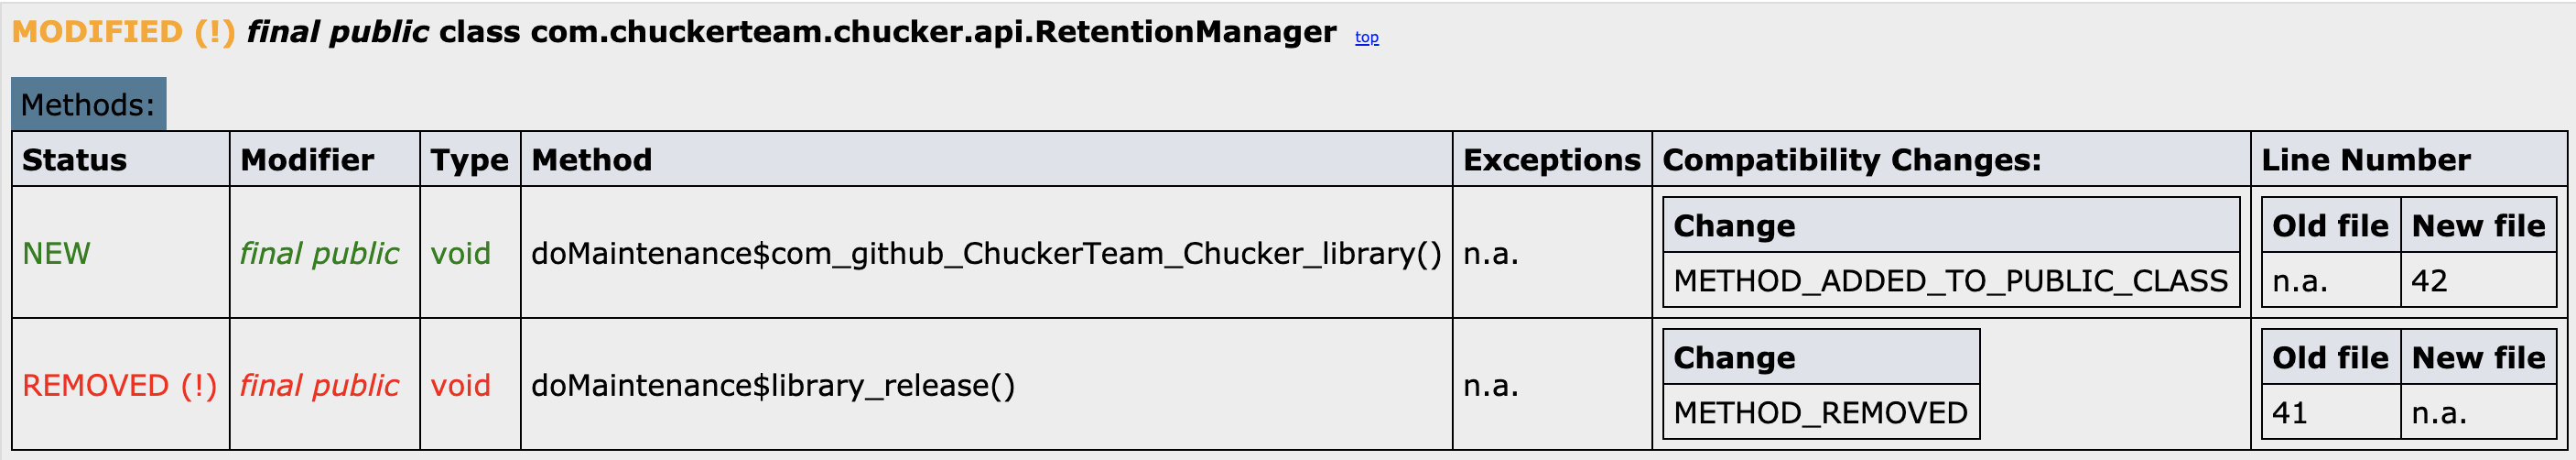 japicmp report for RetentionManager